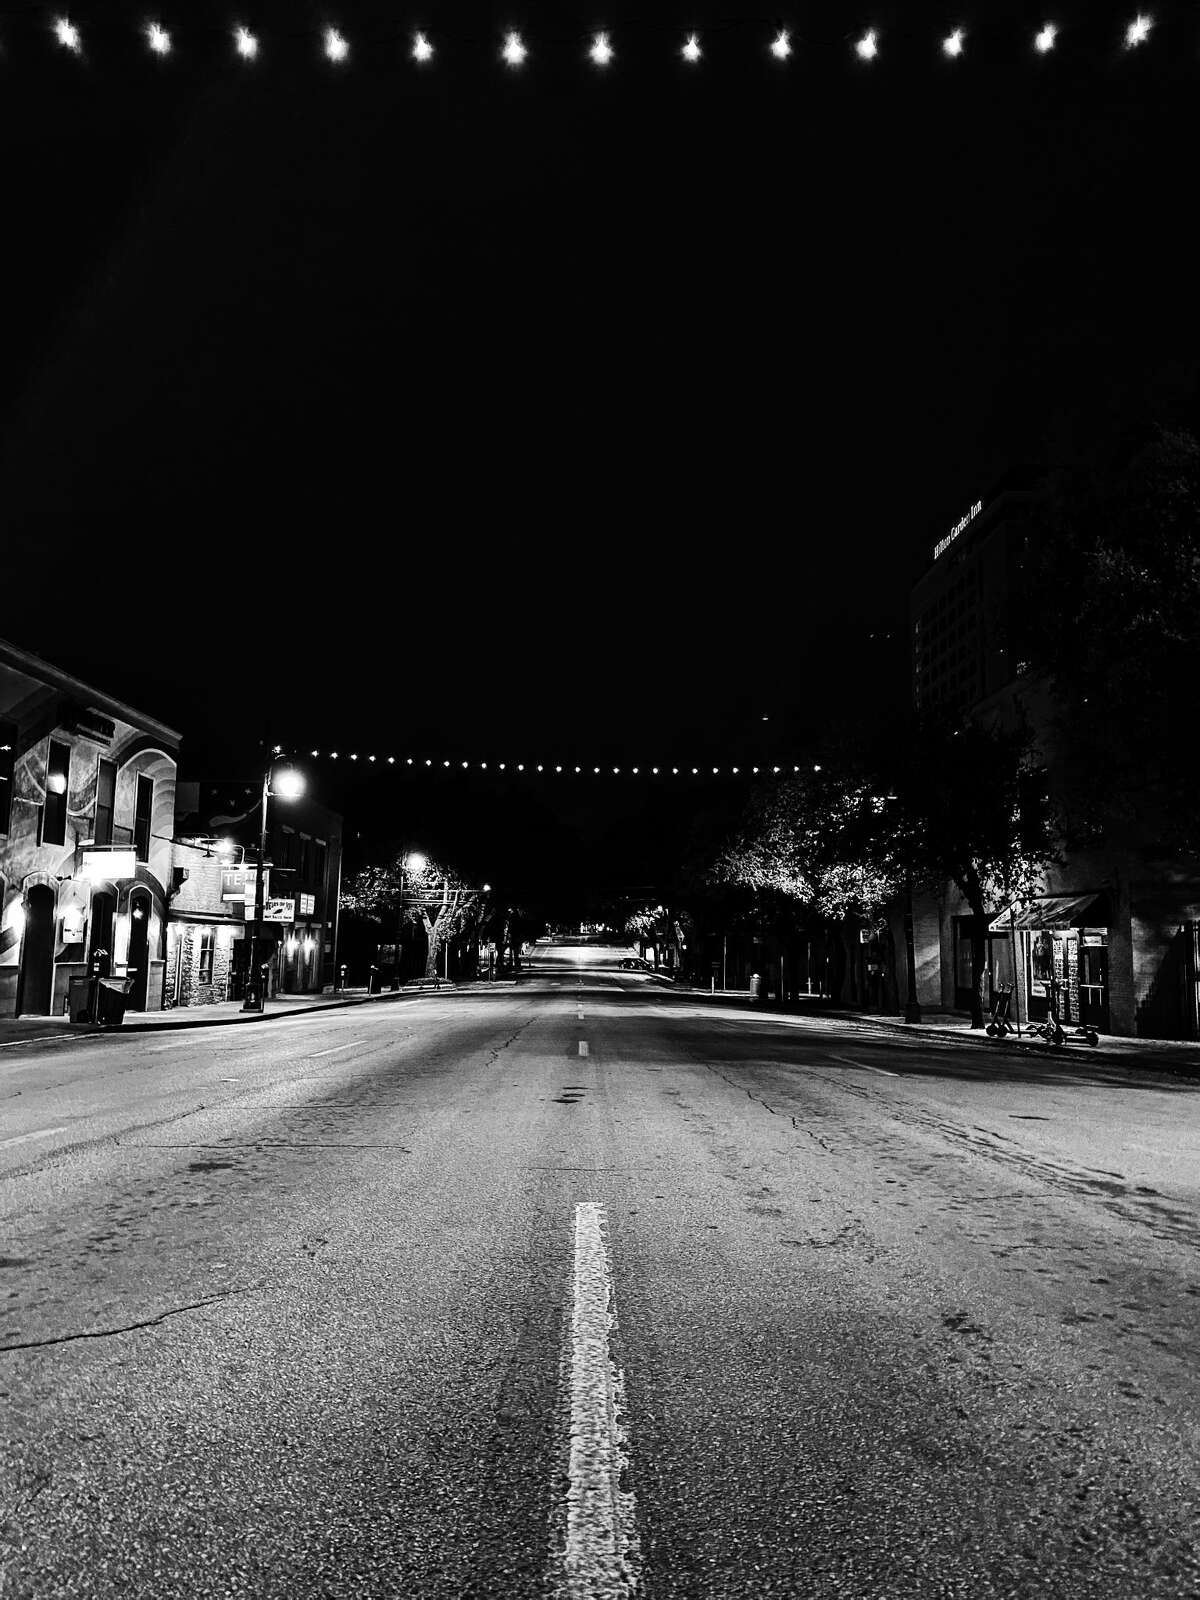 Longtime resident Andrei Matei captured the "eerie" and "empty" streets of Austin's Sixth Street last Tuesday.